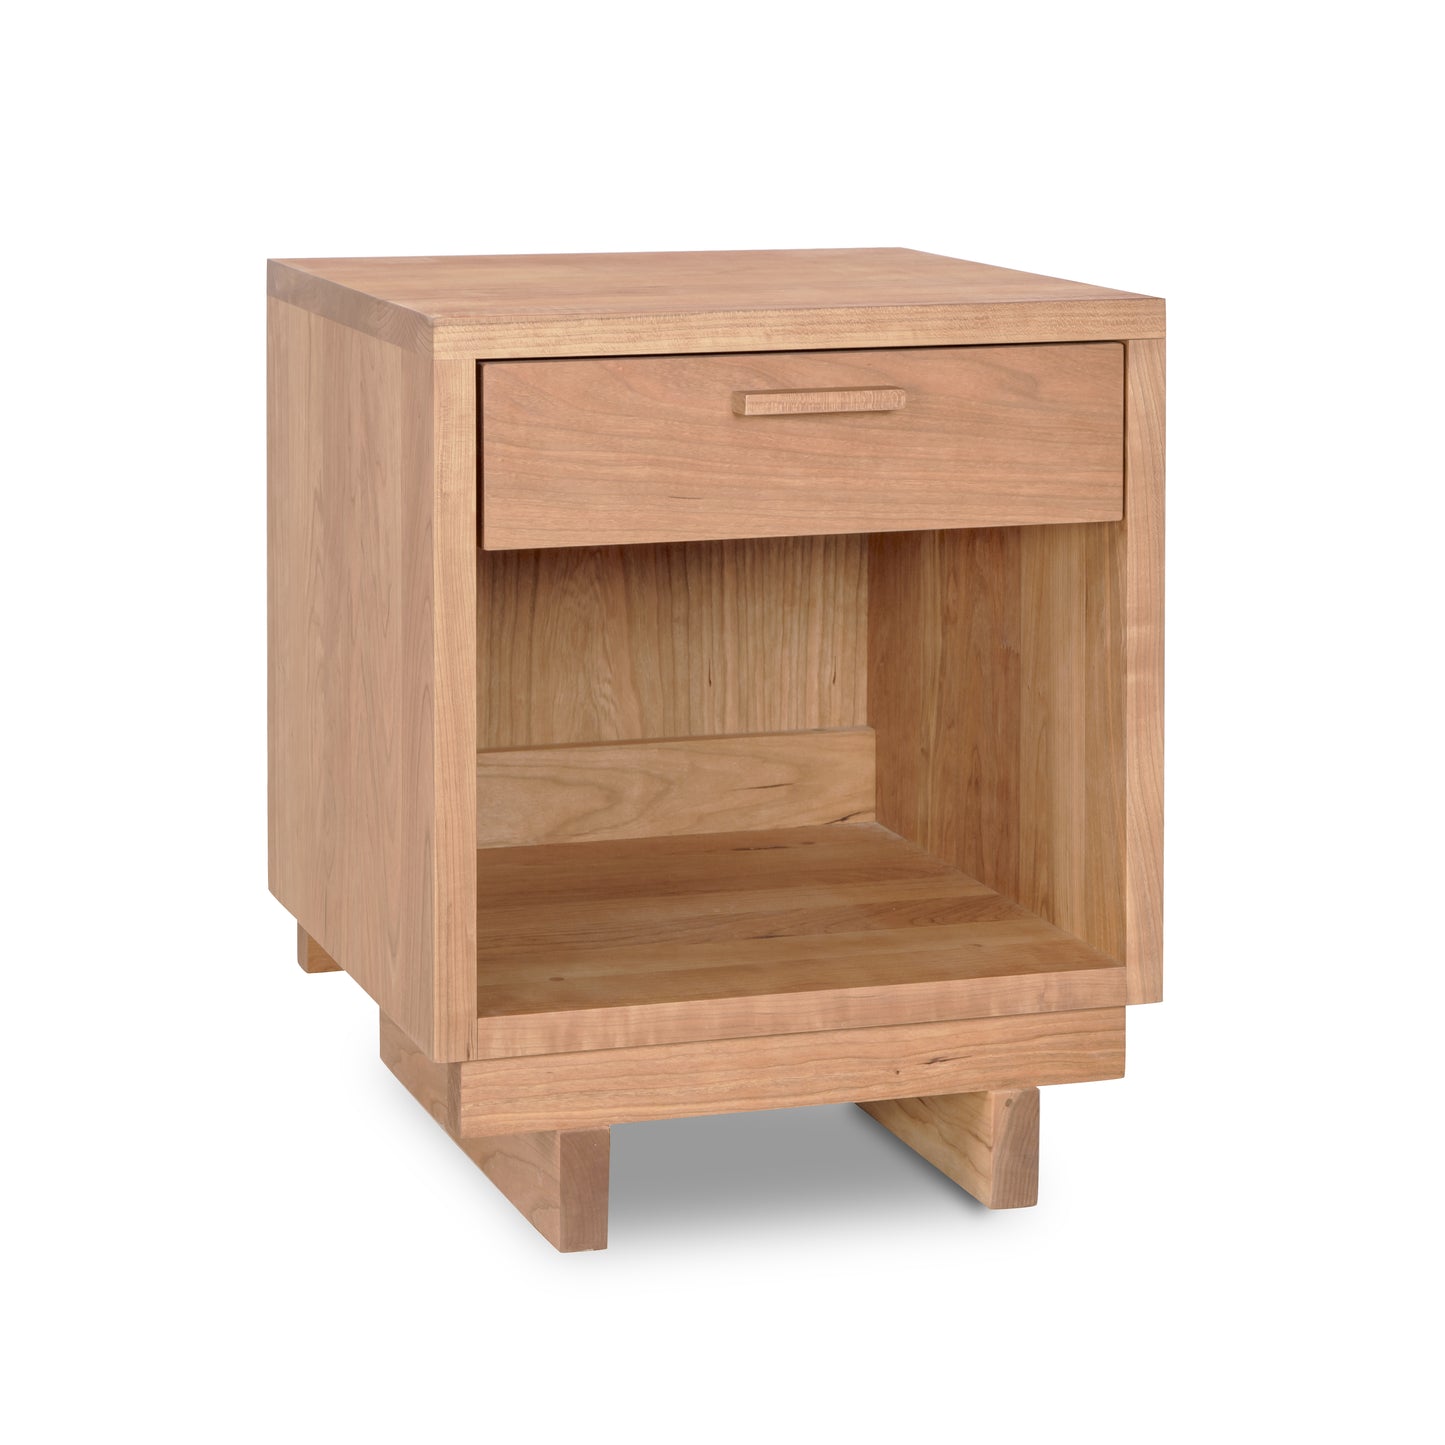 A Vermont Furniture Designs Loft 1-Drawer Enclosed Shelf Nightstand with an open shelf and a closed drawer, isolated on a white background.